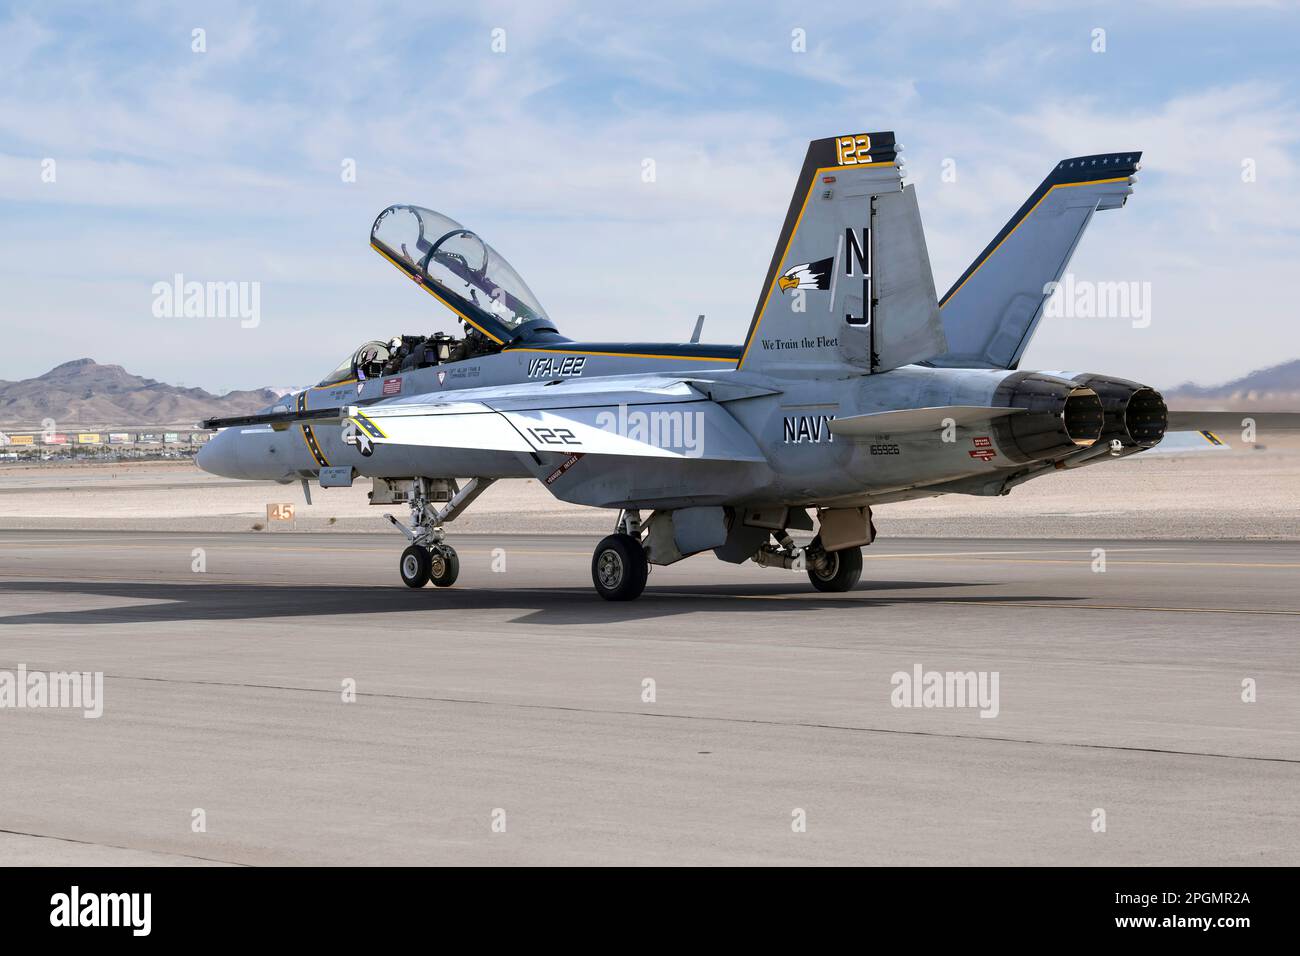 Las Vegas, NV - November 5, 2022: Navy F-18 Super Hornet Fighter Jet Does a Demonstration During the Aviation Nation Airshow at Nellis AFB. Stock Photo